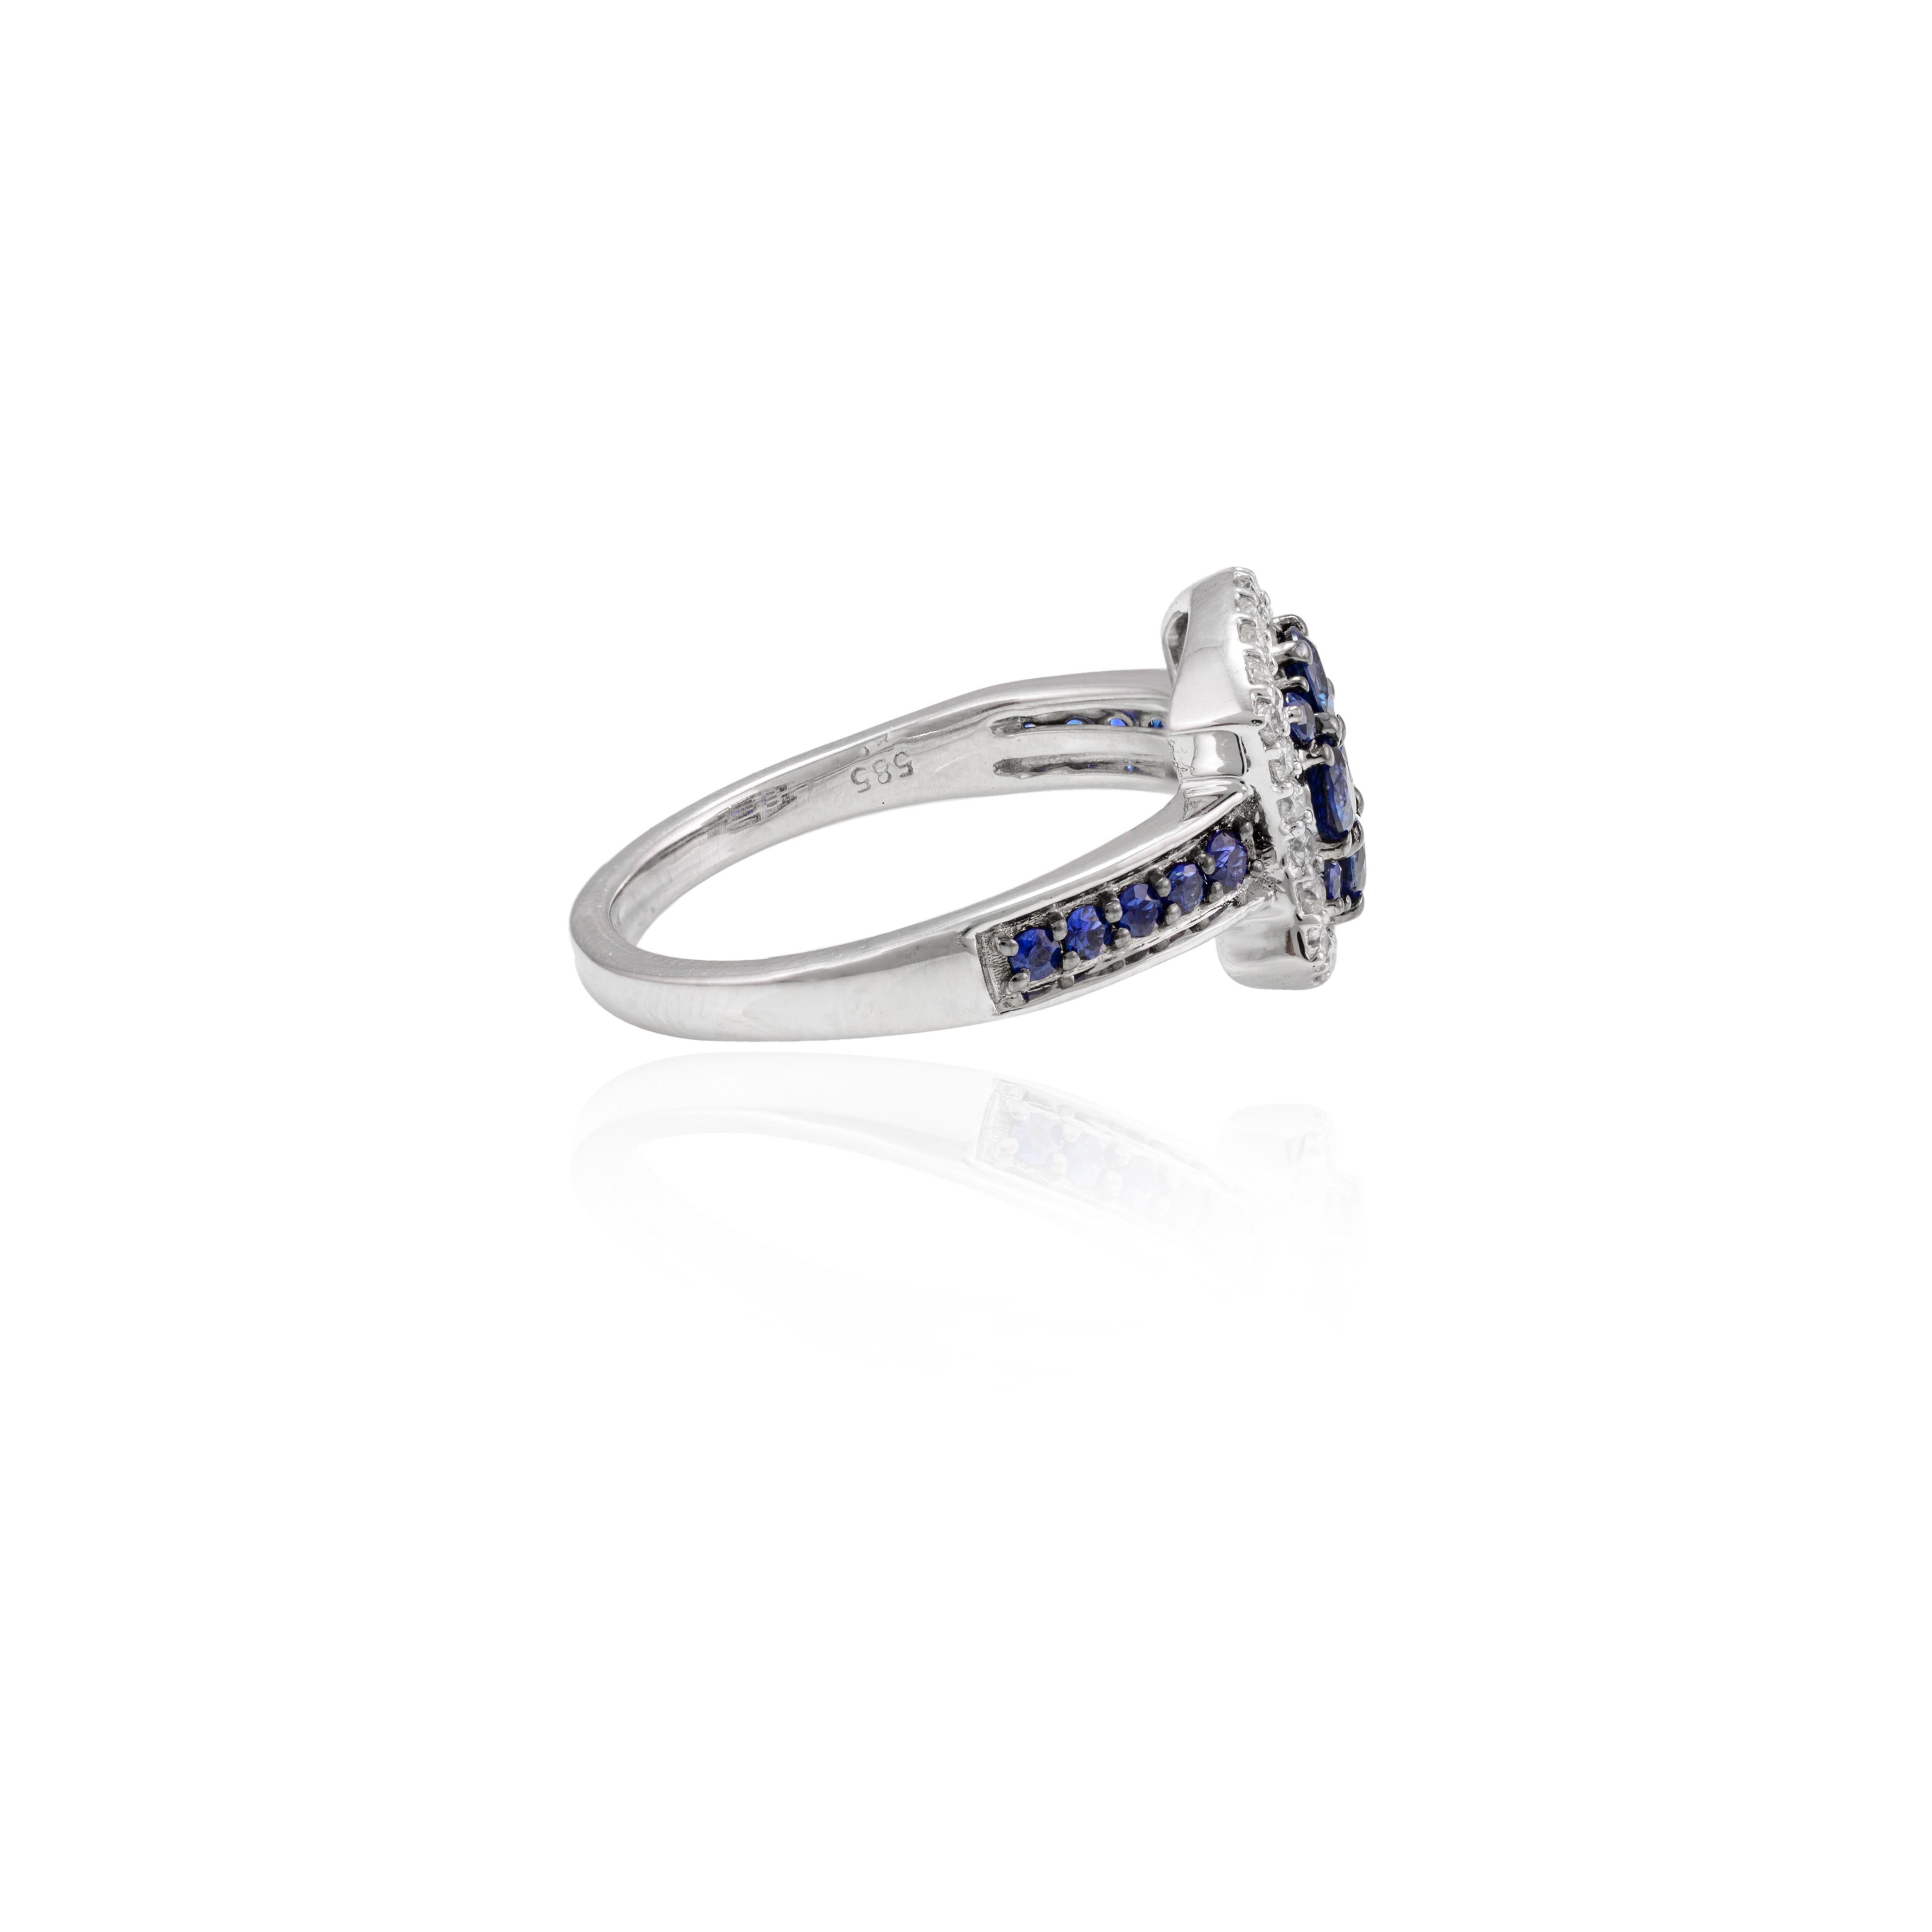 For Sale:  Antique Blue Sapphire and Diamond Engagement Ring in 14k Solid White Gold 3